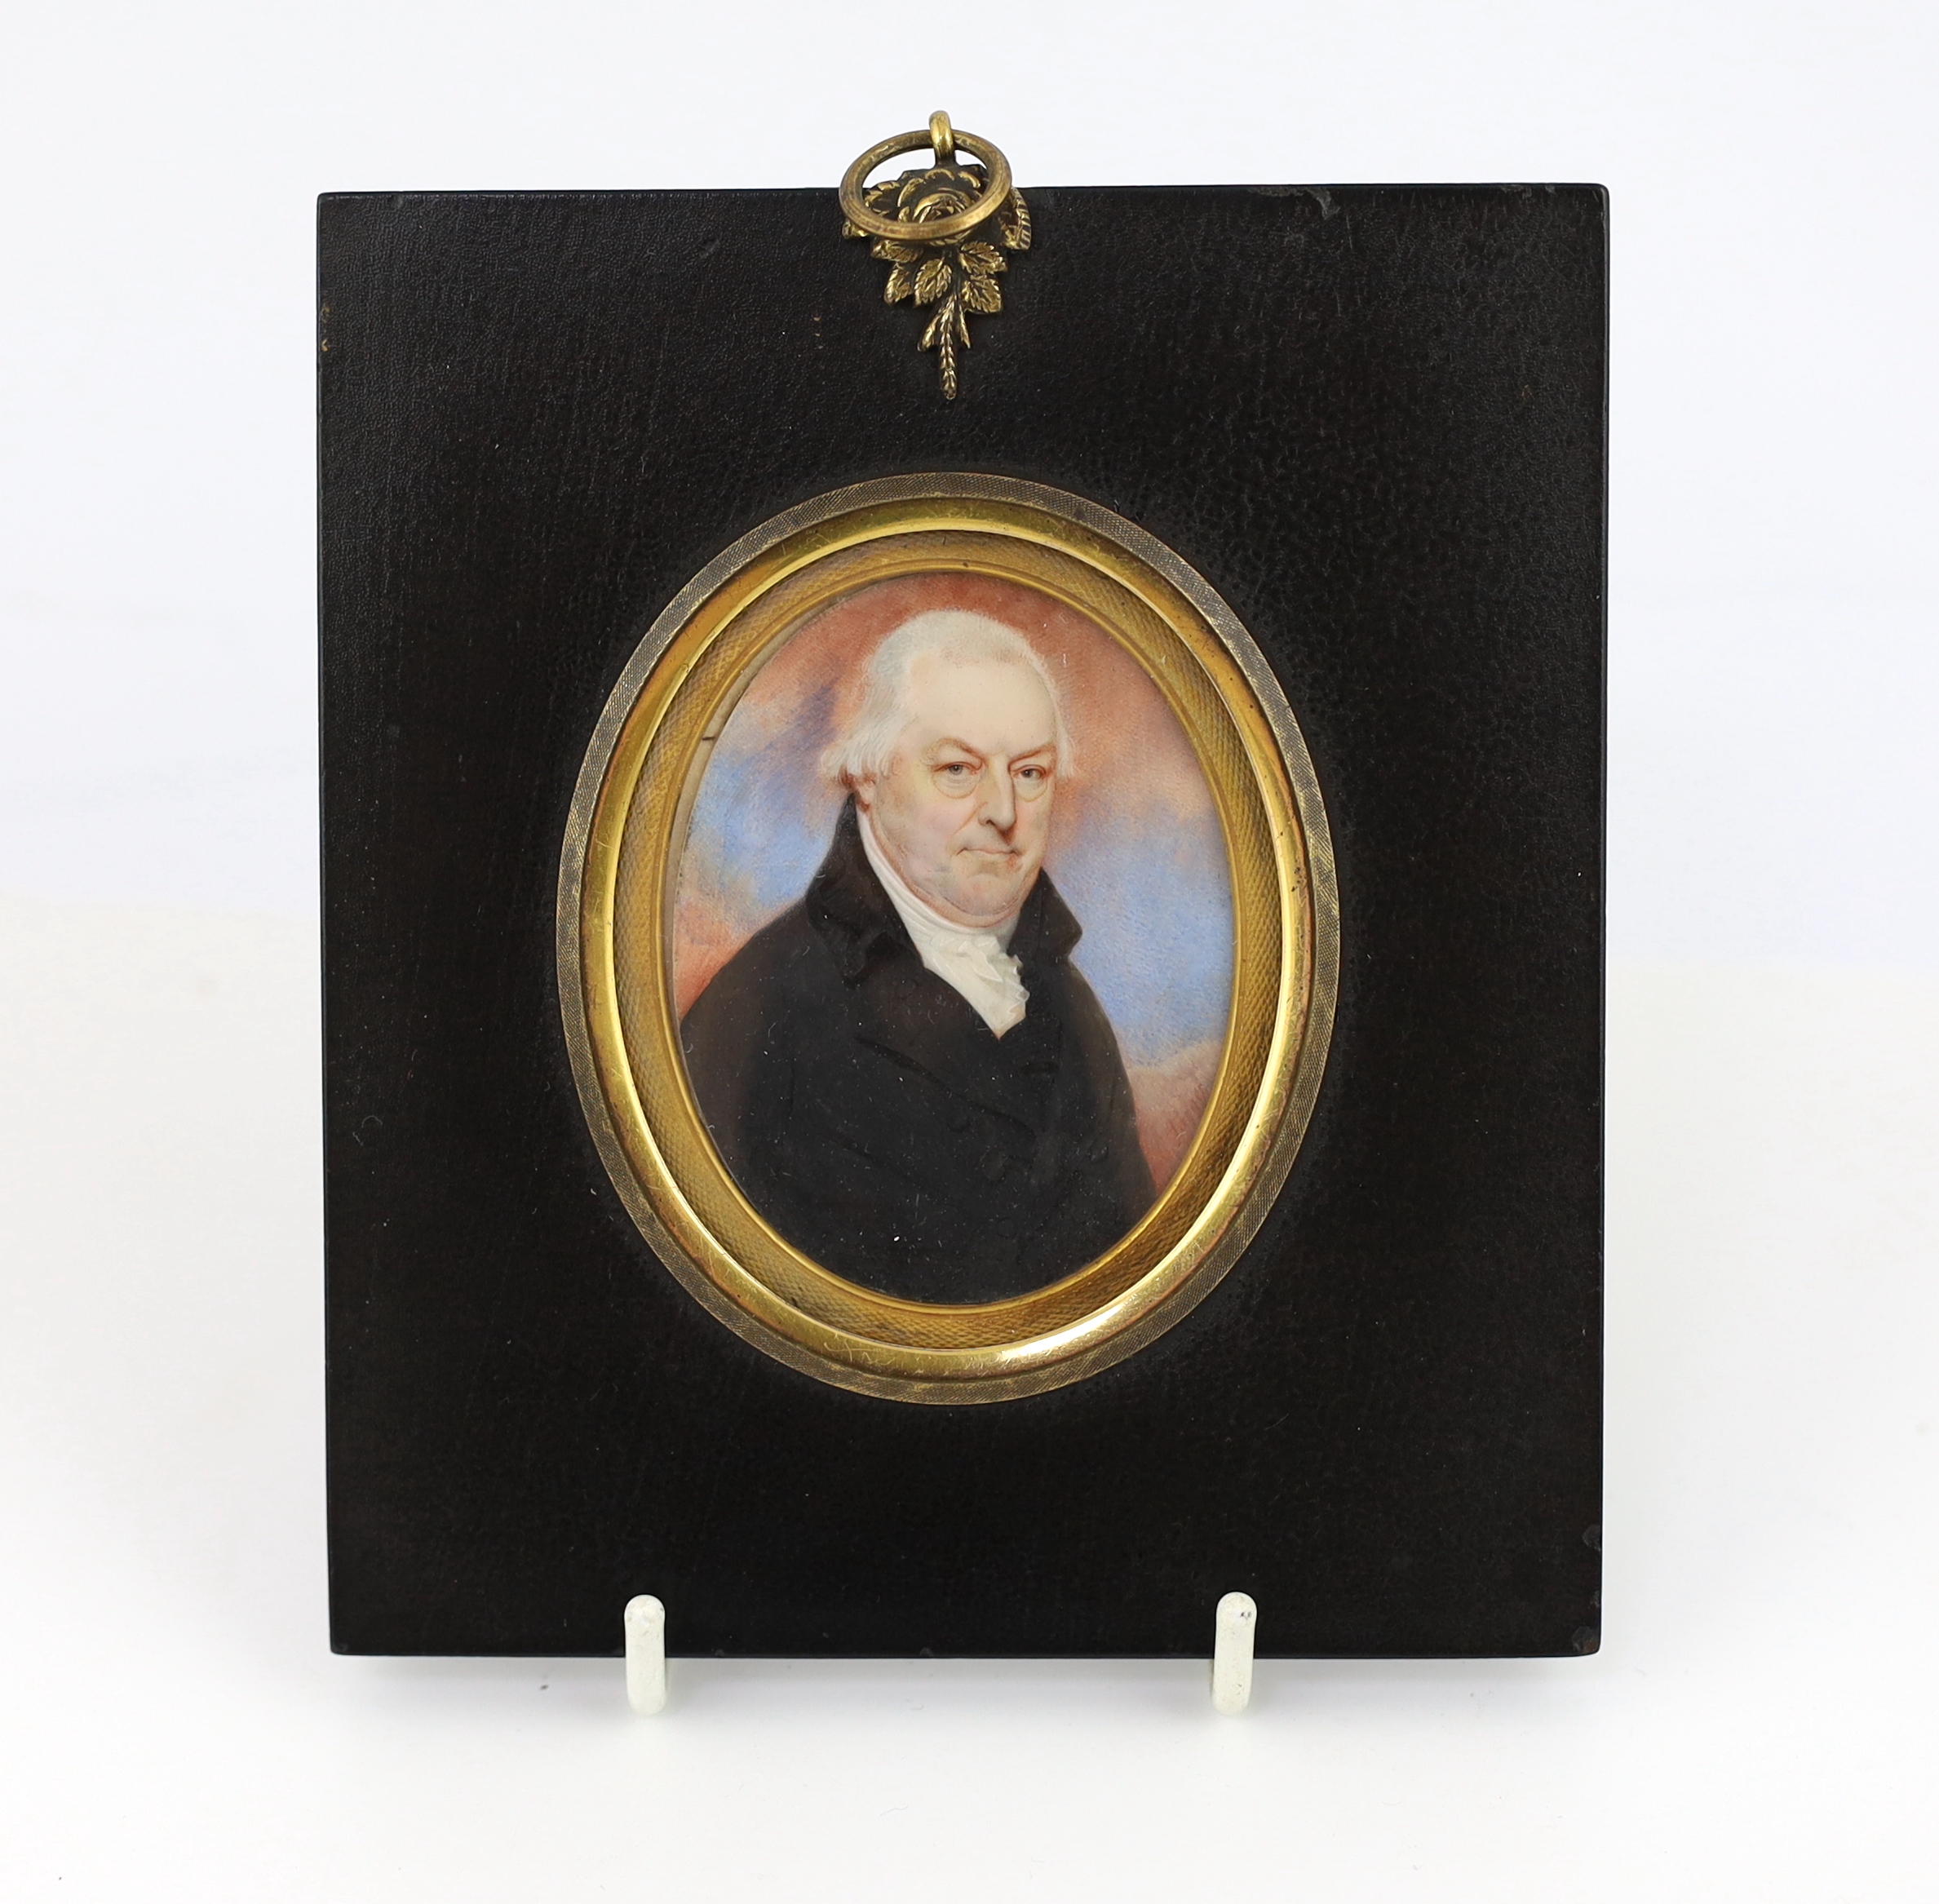 Charles Jagger (English, 1770-1827), Portrait miniature of a gentleman with tinted clouds beyond, watercolour on ivory, 6.5 x 5cm. CITES Submission reference JM8C88RW